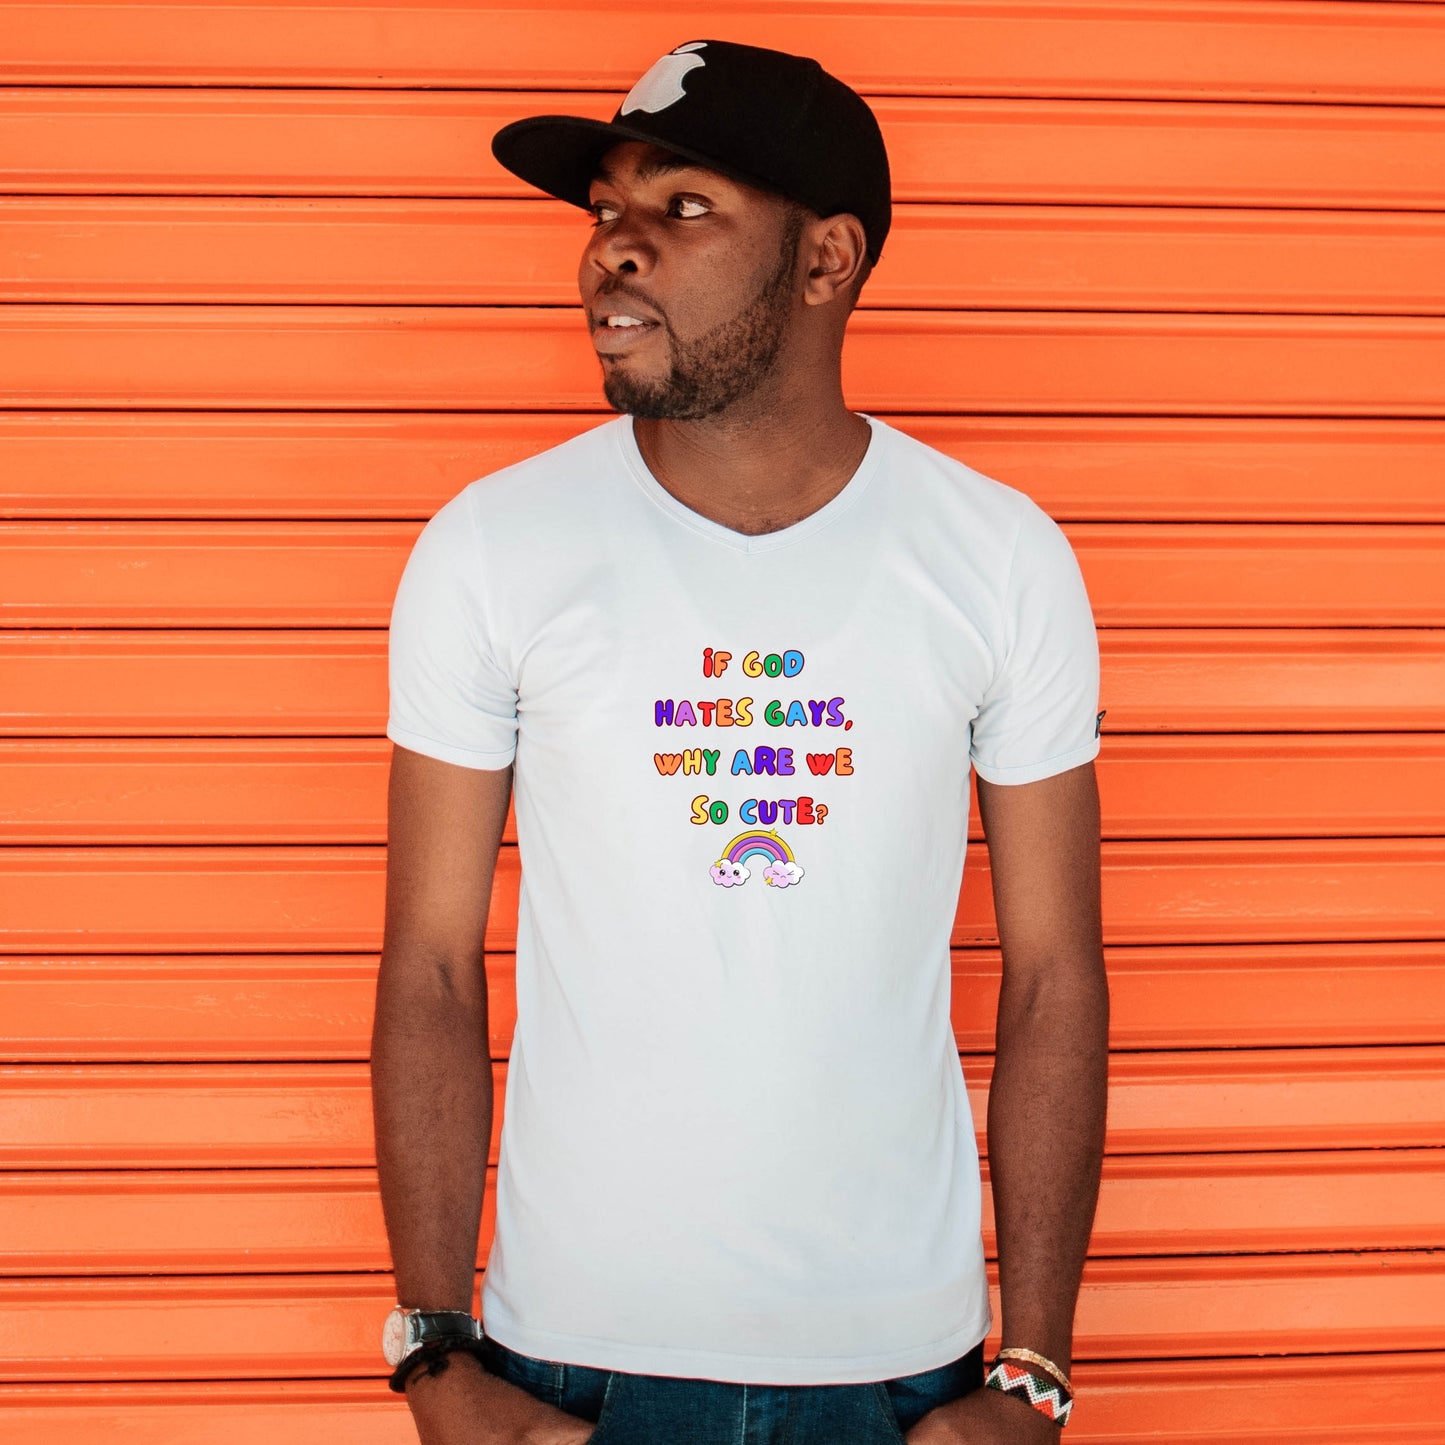 If God Hates Gays Then Why are we so Cute T-shirt